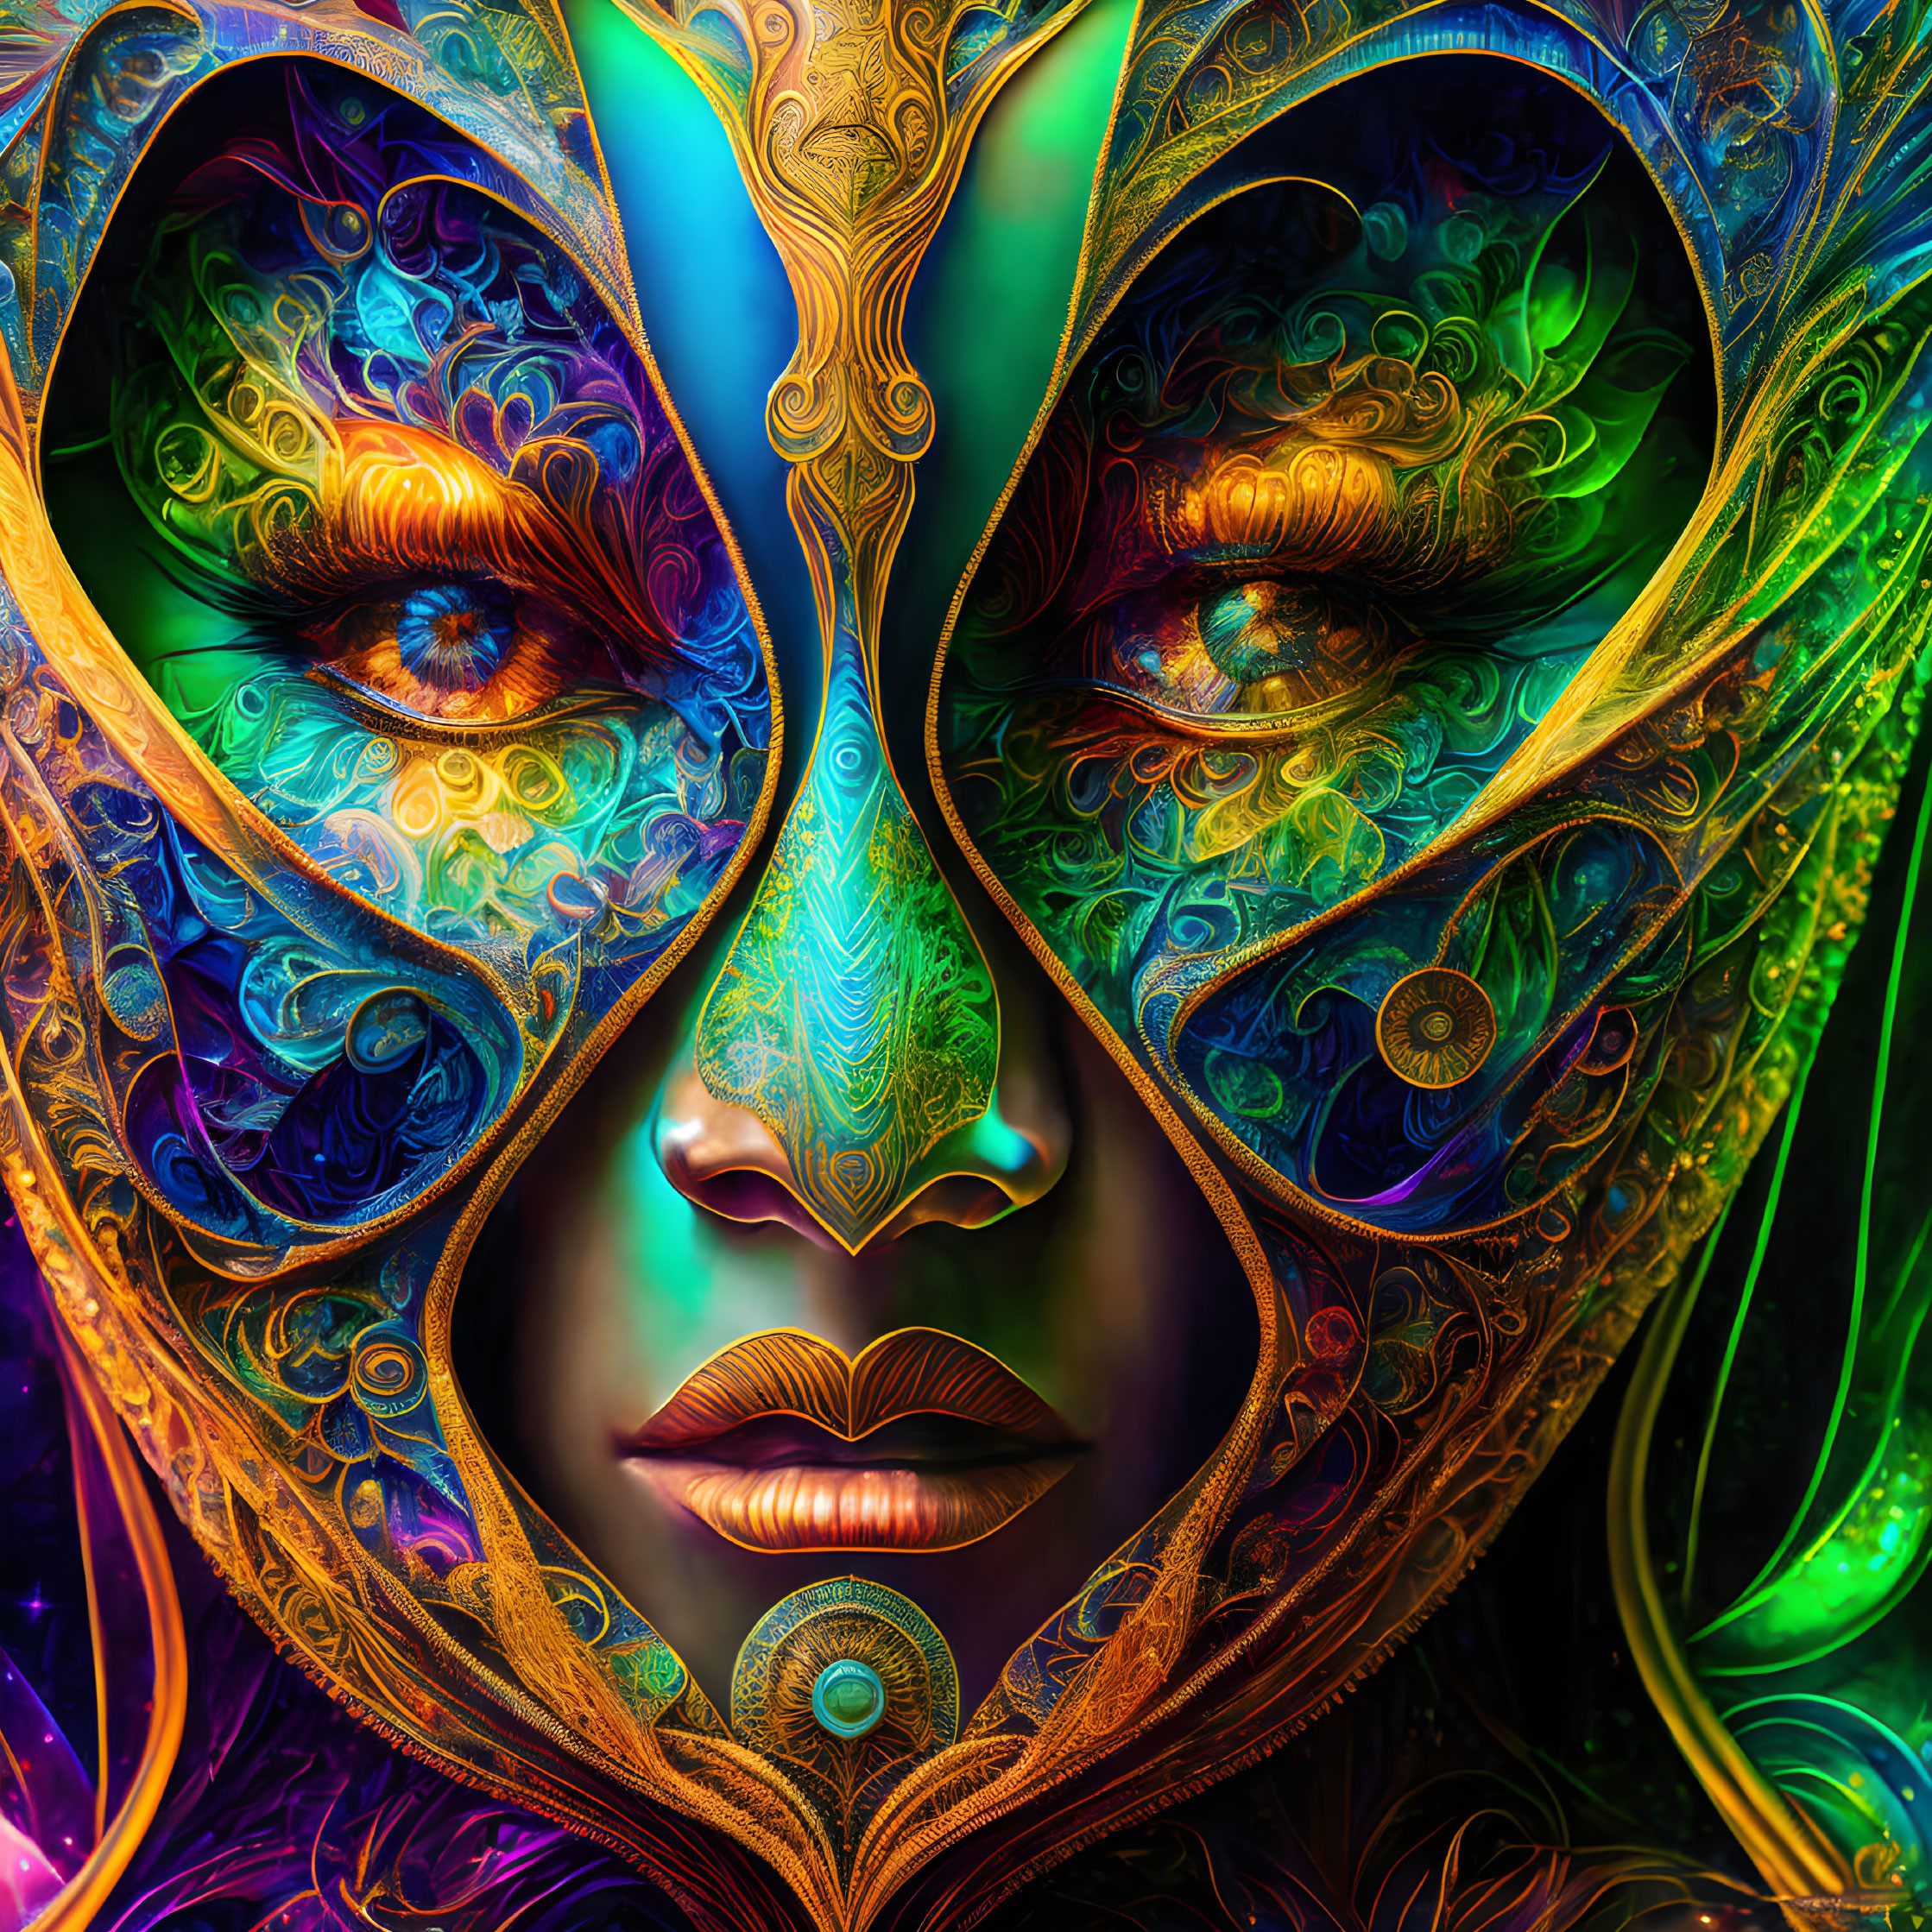 Colorful digital artwork of a face with ornate heart-shaped mask